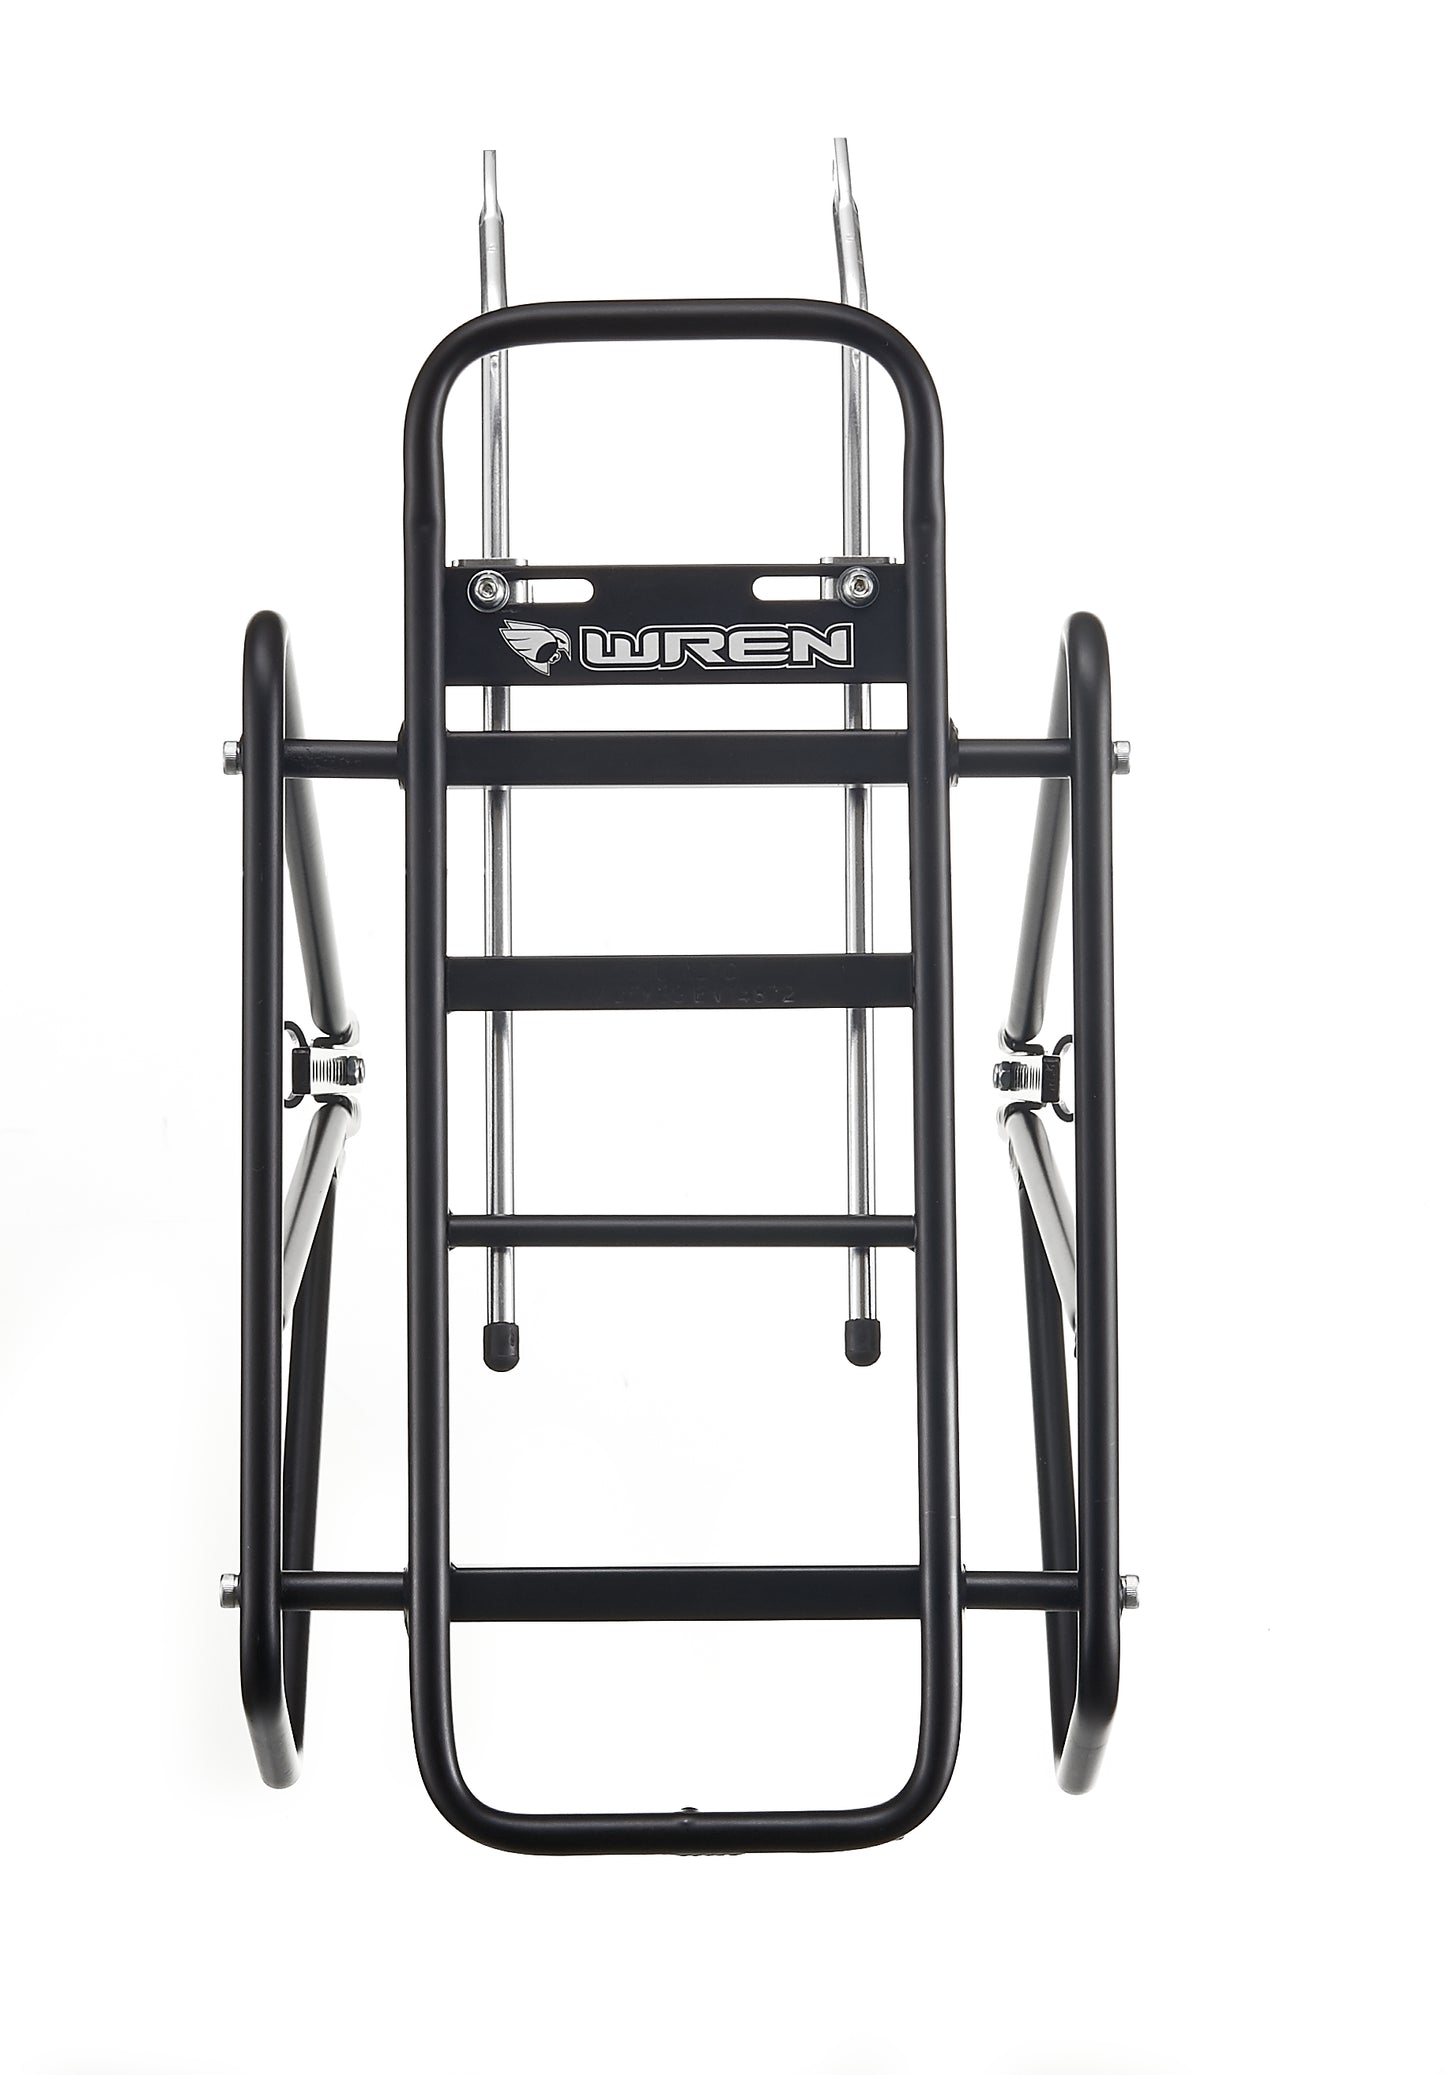 WREN ONERACK - The only rack you need!